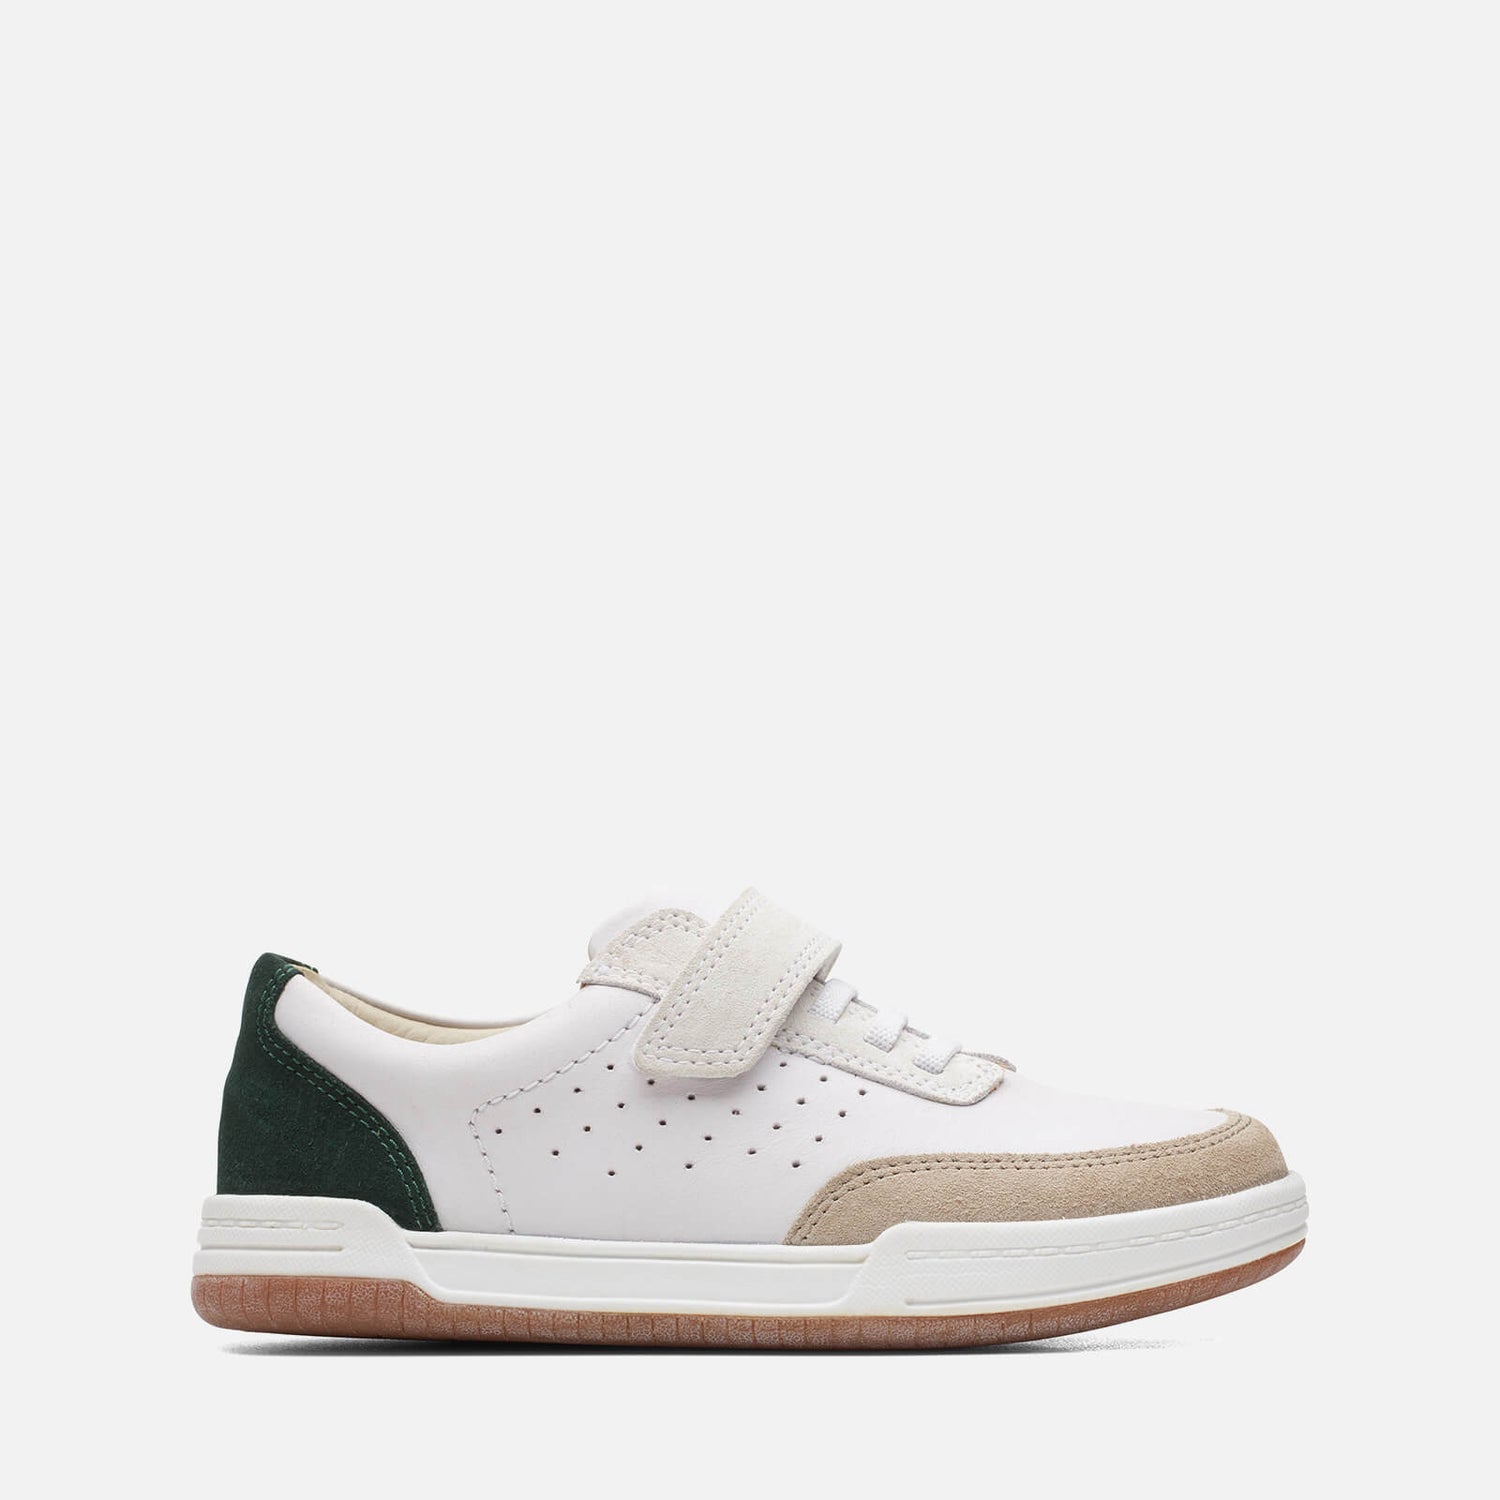 Clarks Toddler Fawn Hero Trainers - White/Green